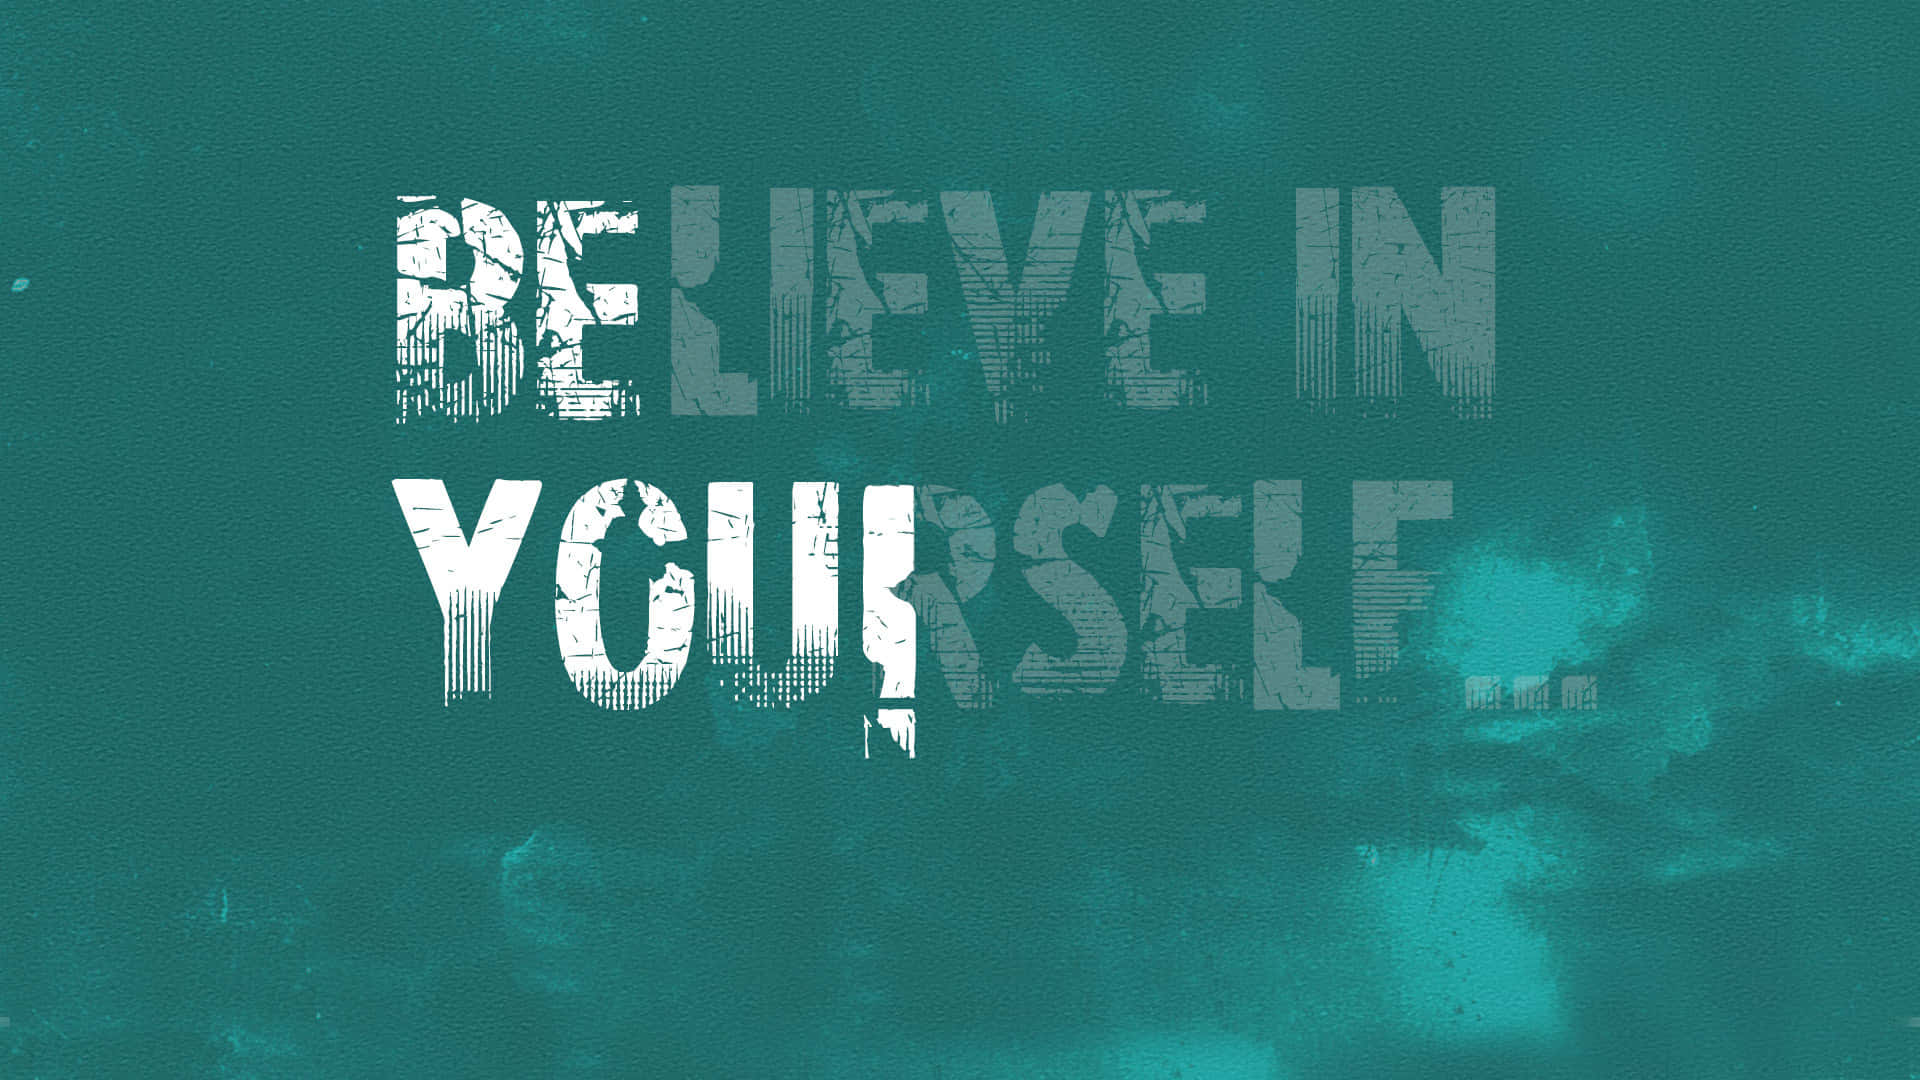 Belie In Yourself - A Teal Background With The Words